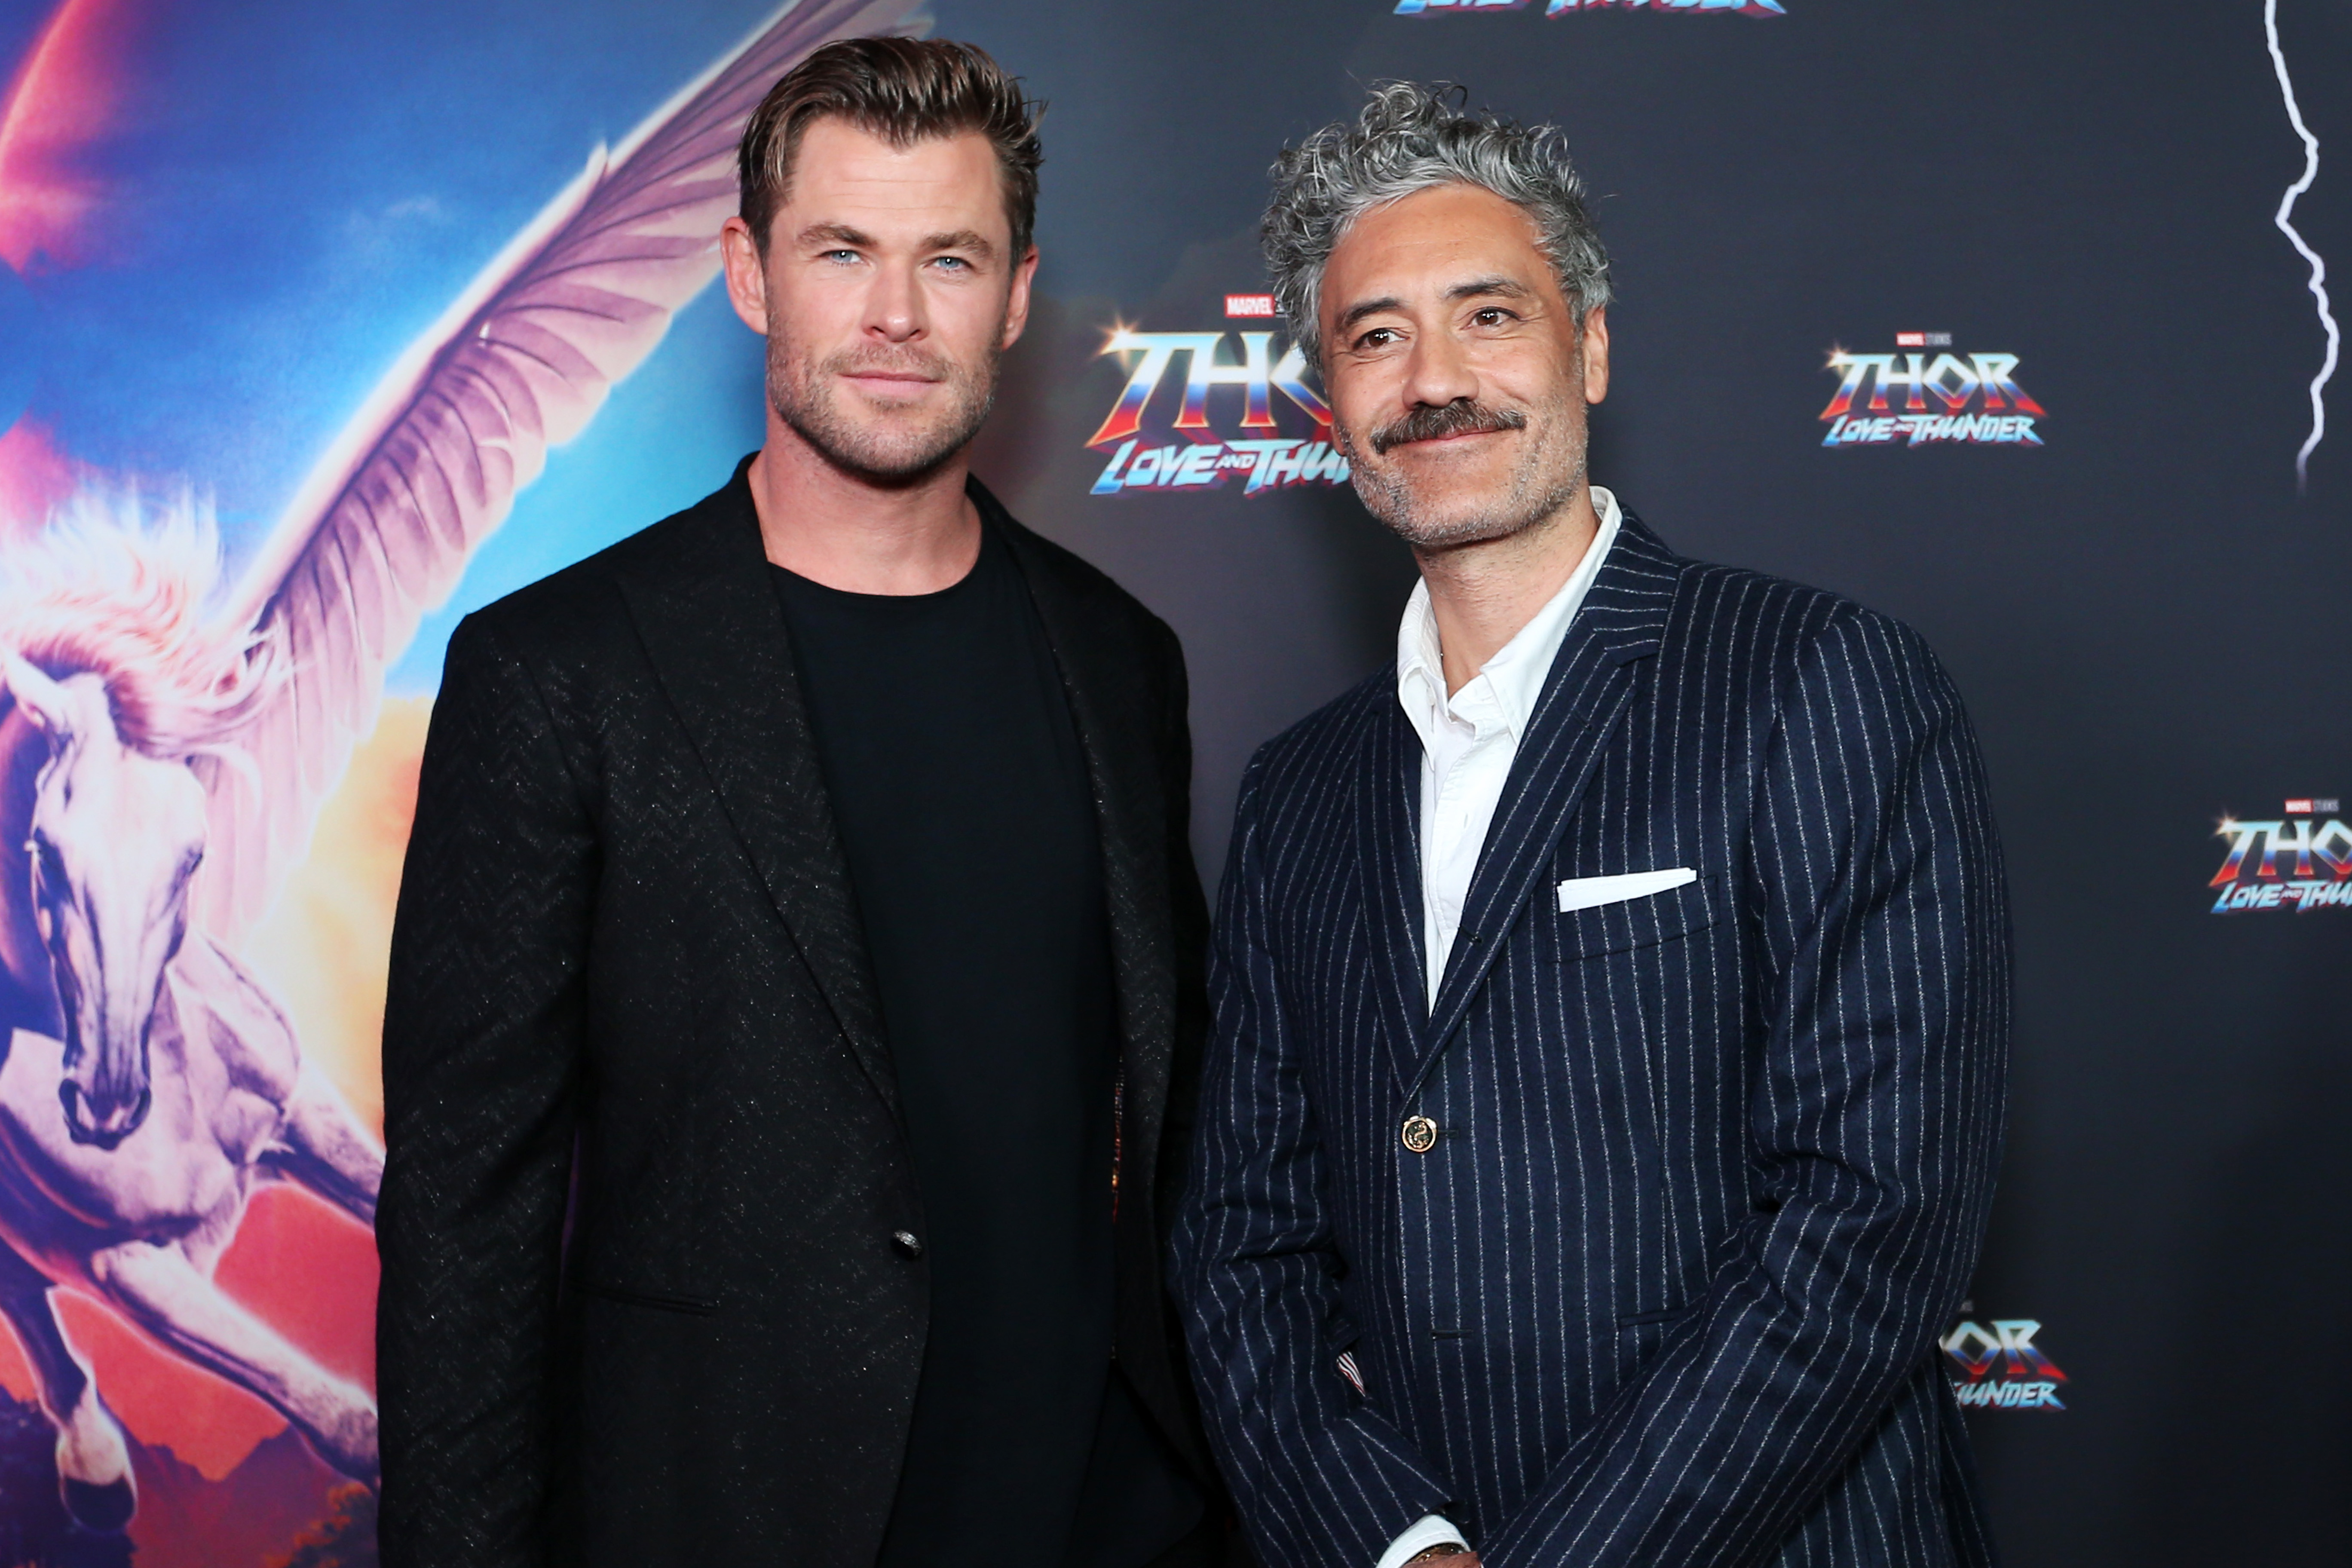 Chris Hemsworth and Taika Waititi, who star in Marvel's 'Thor: Love and Thunder,' pose for pictures on the red carpet. Hemsworth wears a black suit over a black shirt. Waititi wears a black suit with thin white vertical stripes over a white button-up shirt.